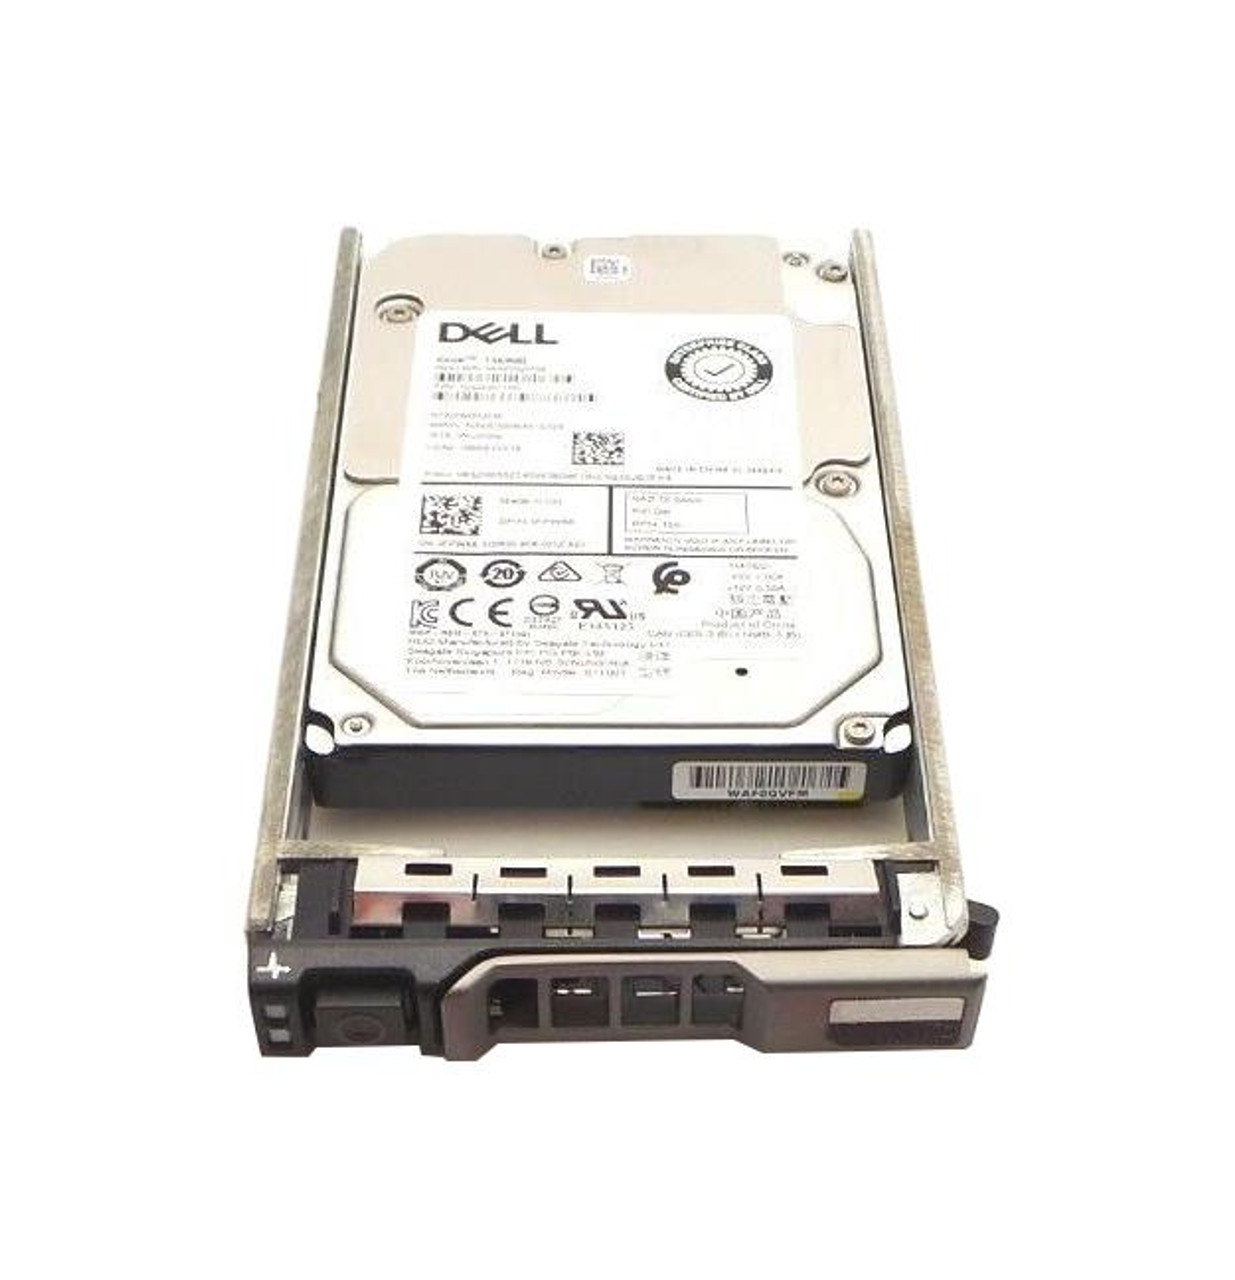 TFFD4 Dell 1.8TB 10000RPM SAS 12Gbps Hot Swap (SED) 2.5-inch Internal Hard Drive with Tray